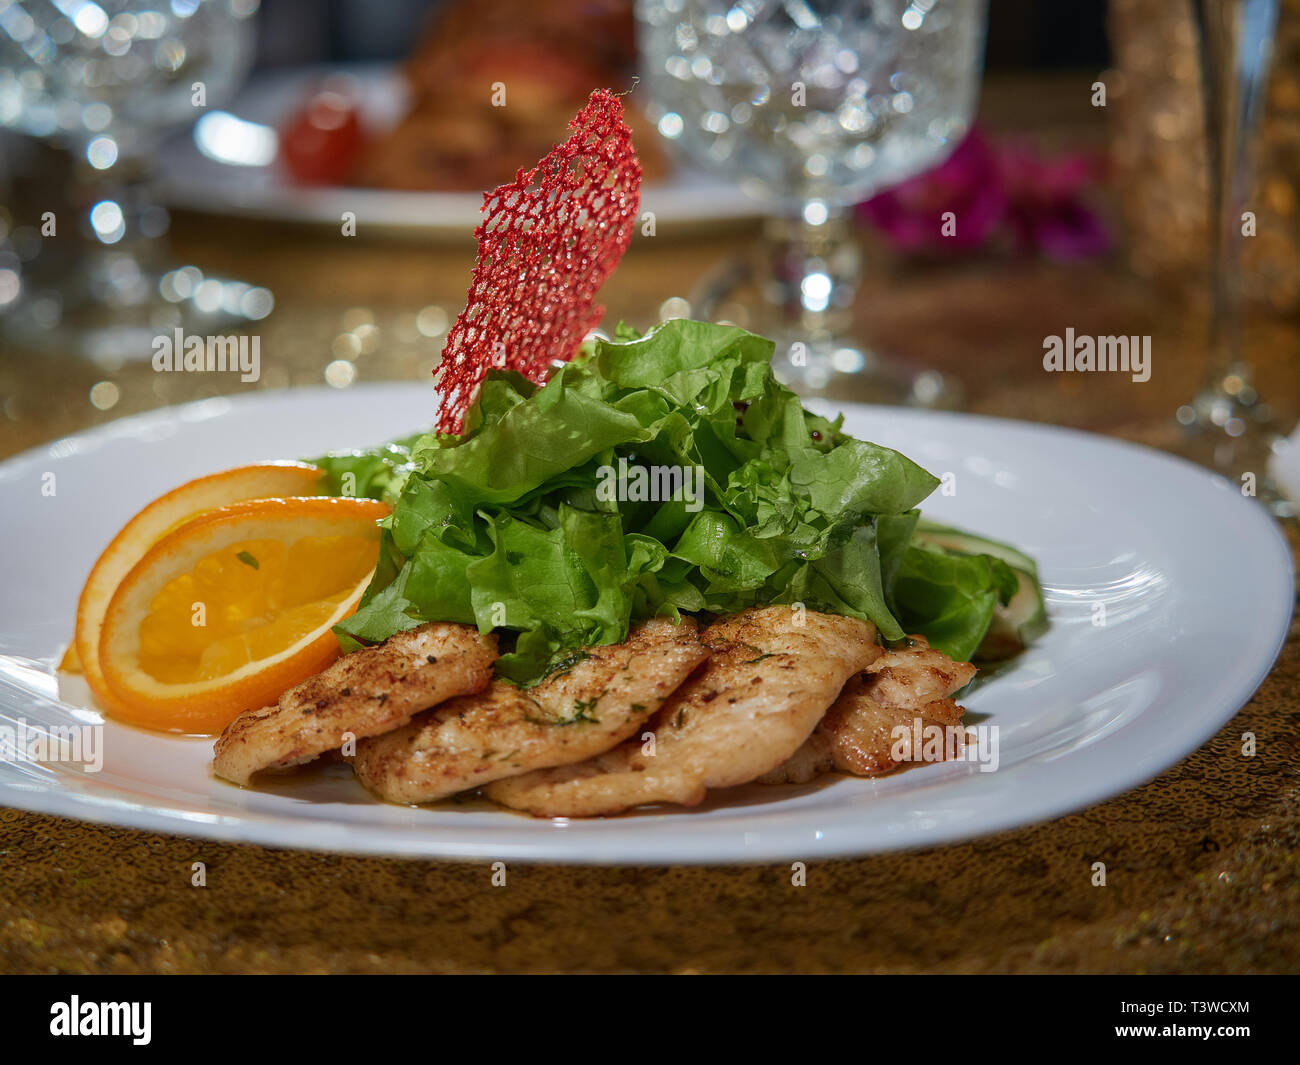 Fresh pieces of pork meat fried over an open fire. Served with lemon slices and green lettuce. Stock Photo